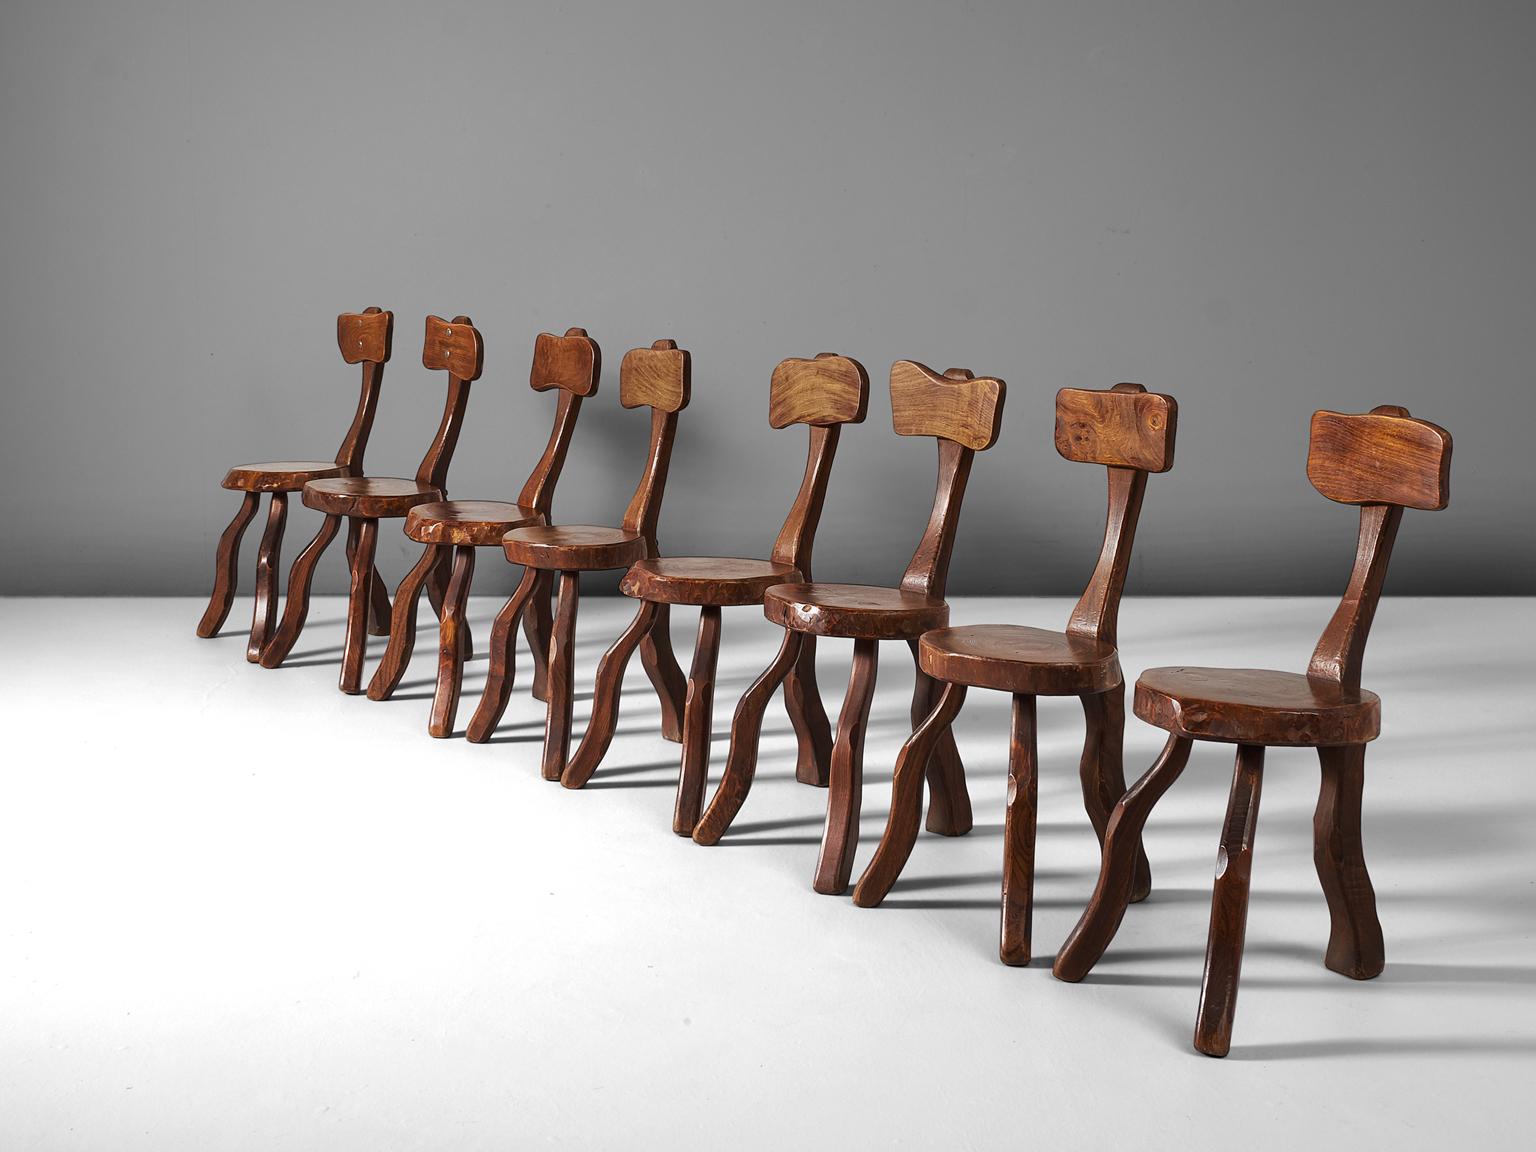 Set of eight root chairs, solid elmwood, France, 1970s. 

Eight slab chairs in elmwood, solid and stained dark brown. These chairs have a capricious appearance, due to the natural form and structure of the wood. 

Simplistic three-legged chairs,